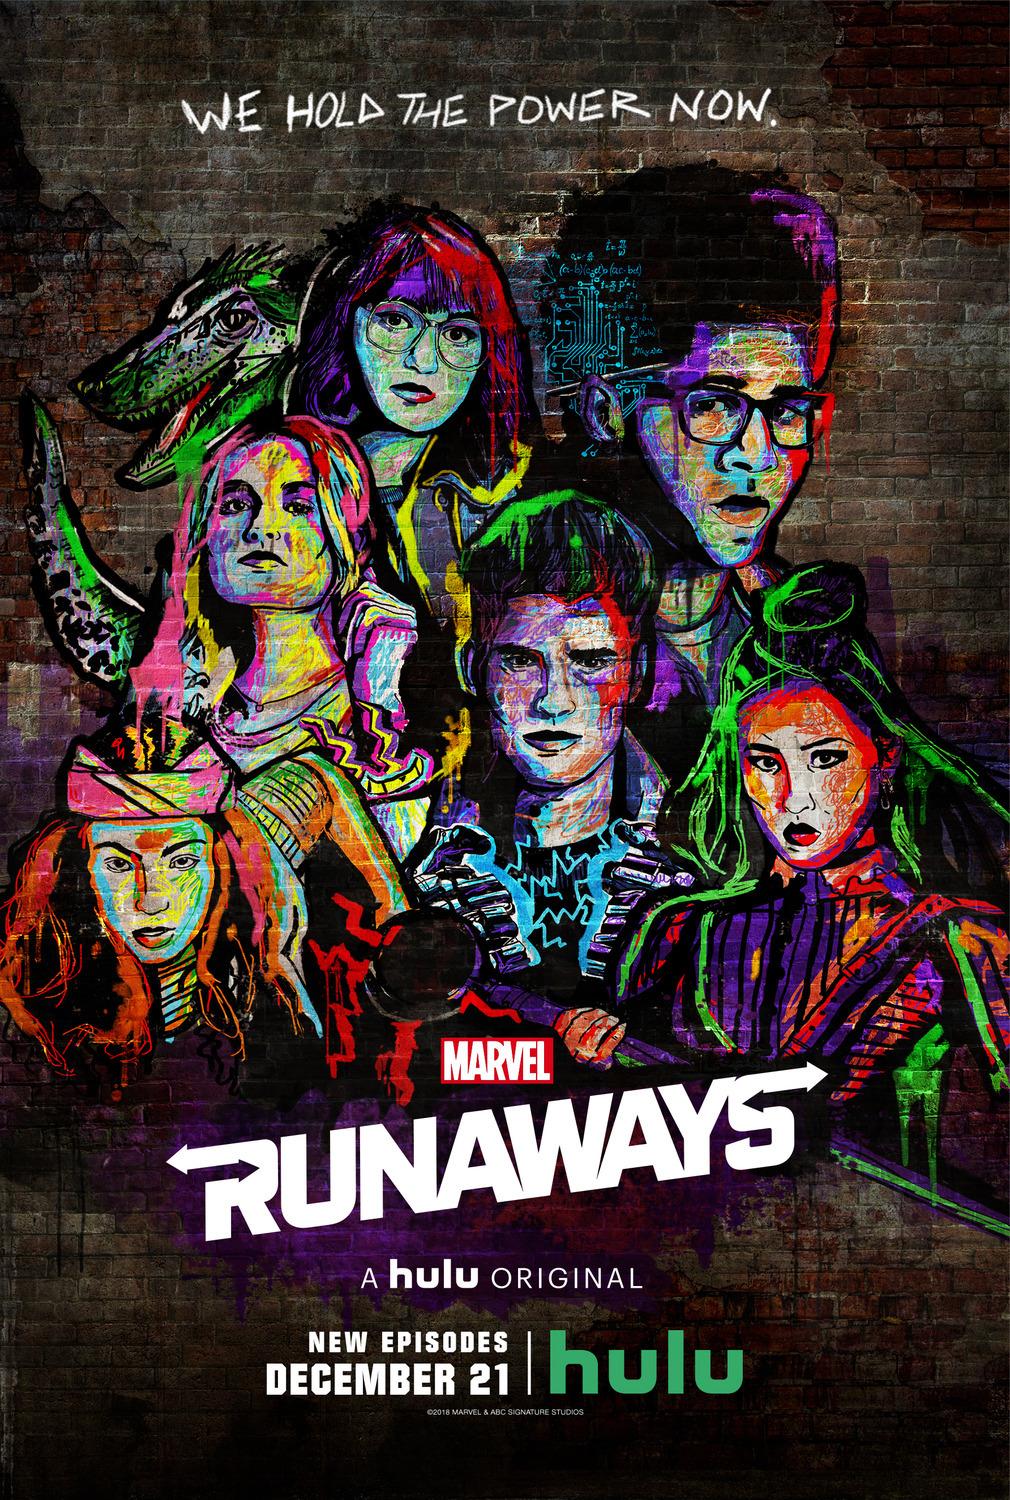 The Runaways Wallpapers